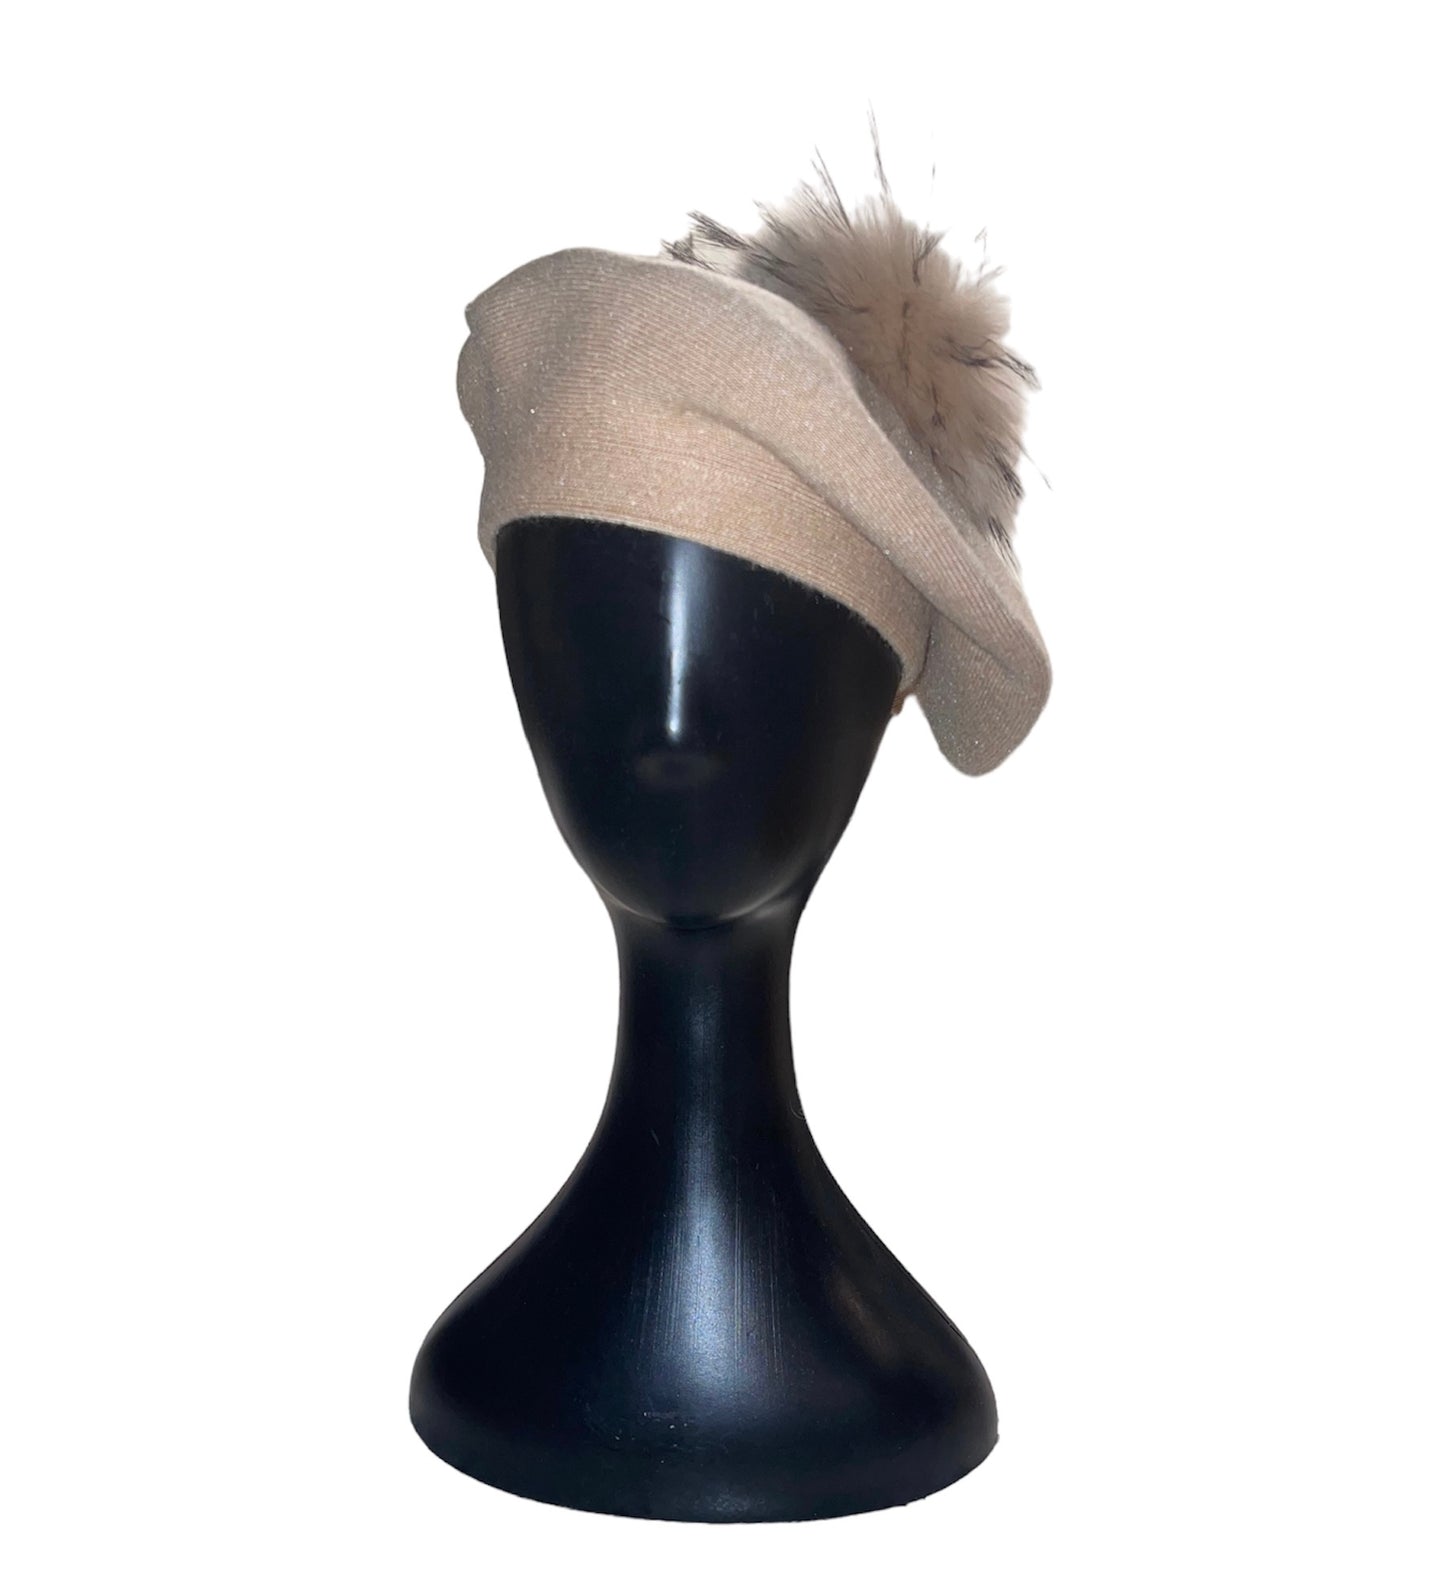 Amour Tan Cashmere Beret with Puffball